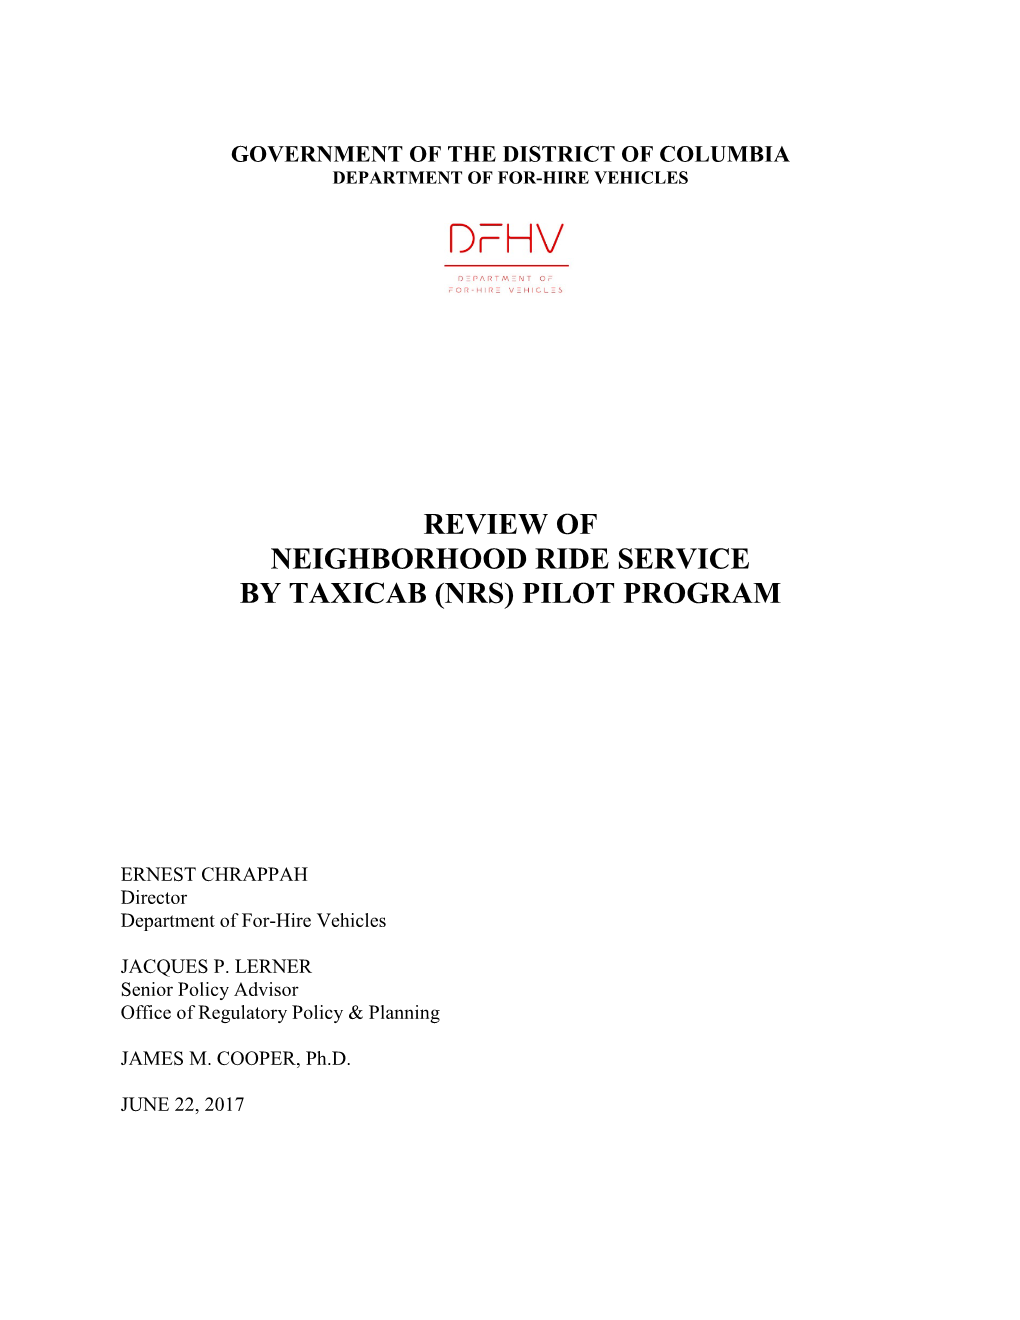 Review of Neighborhood Ride Service by Taxicab (Nrs) Pilot Program